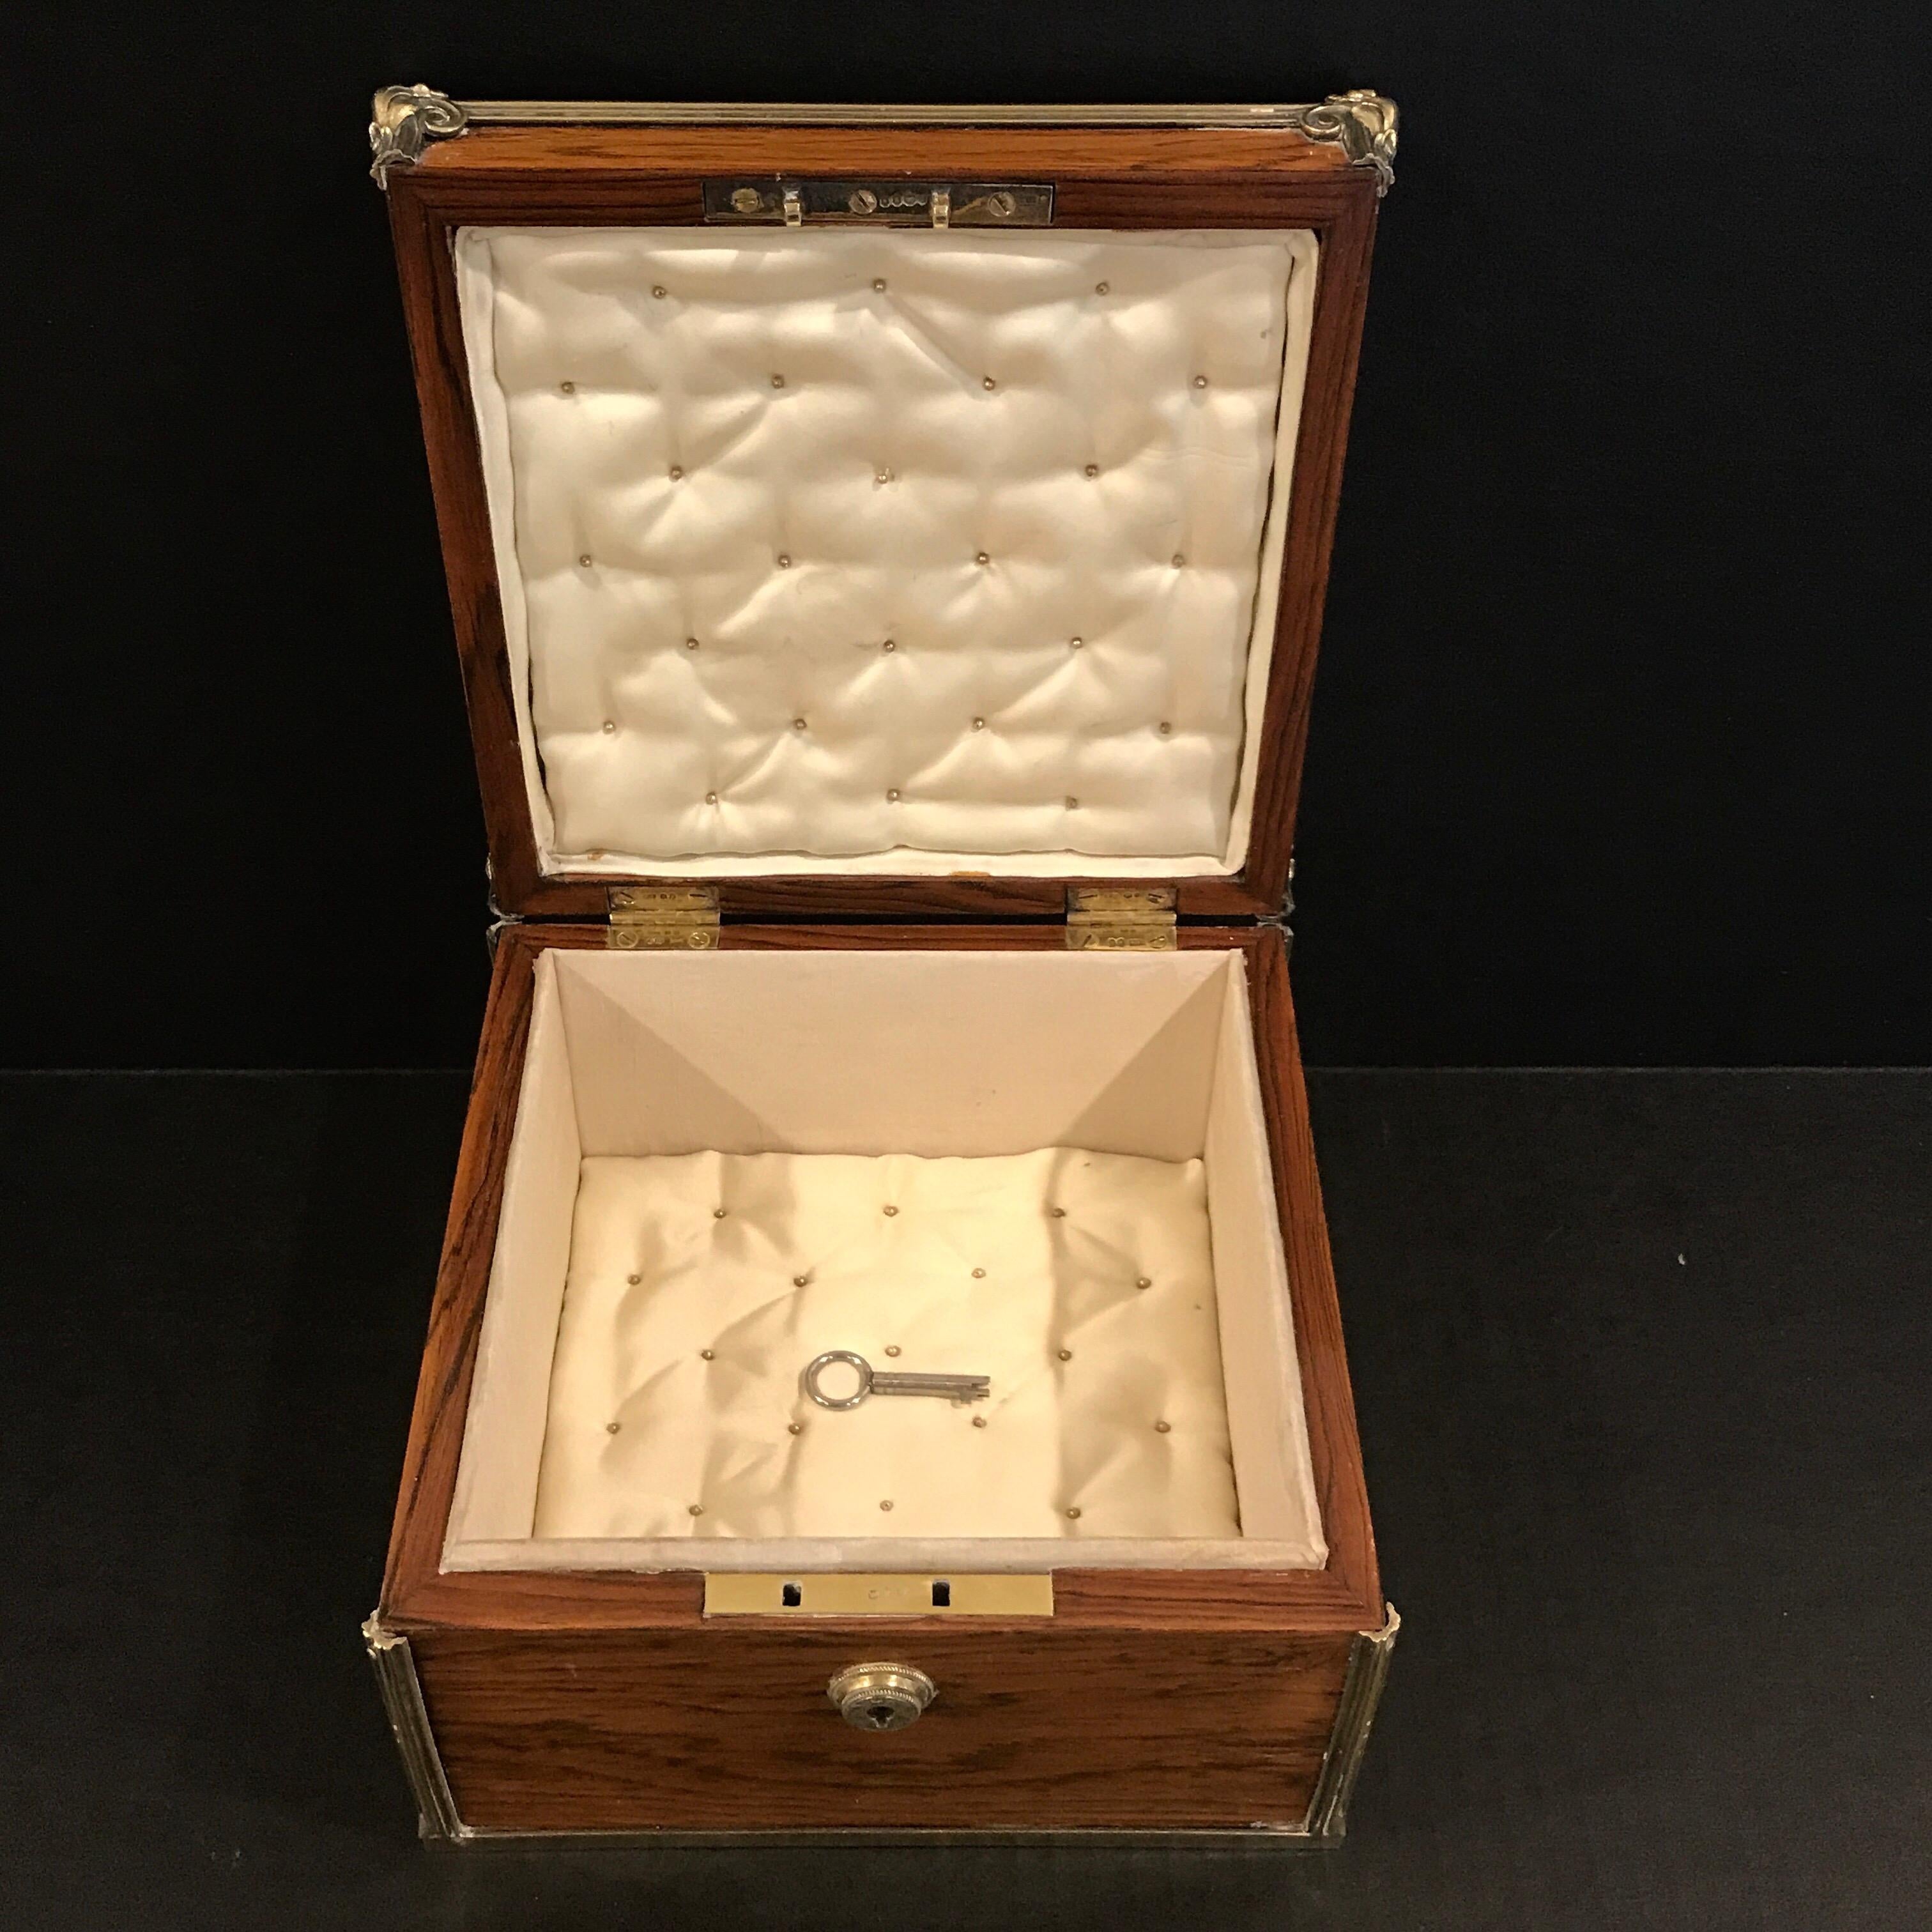 Royal Silver-Gilt Mounted Toilet Box by Paul Storr, London, 1813 For Sale 3